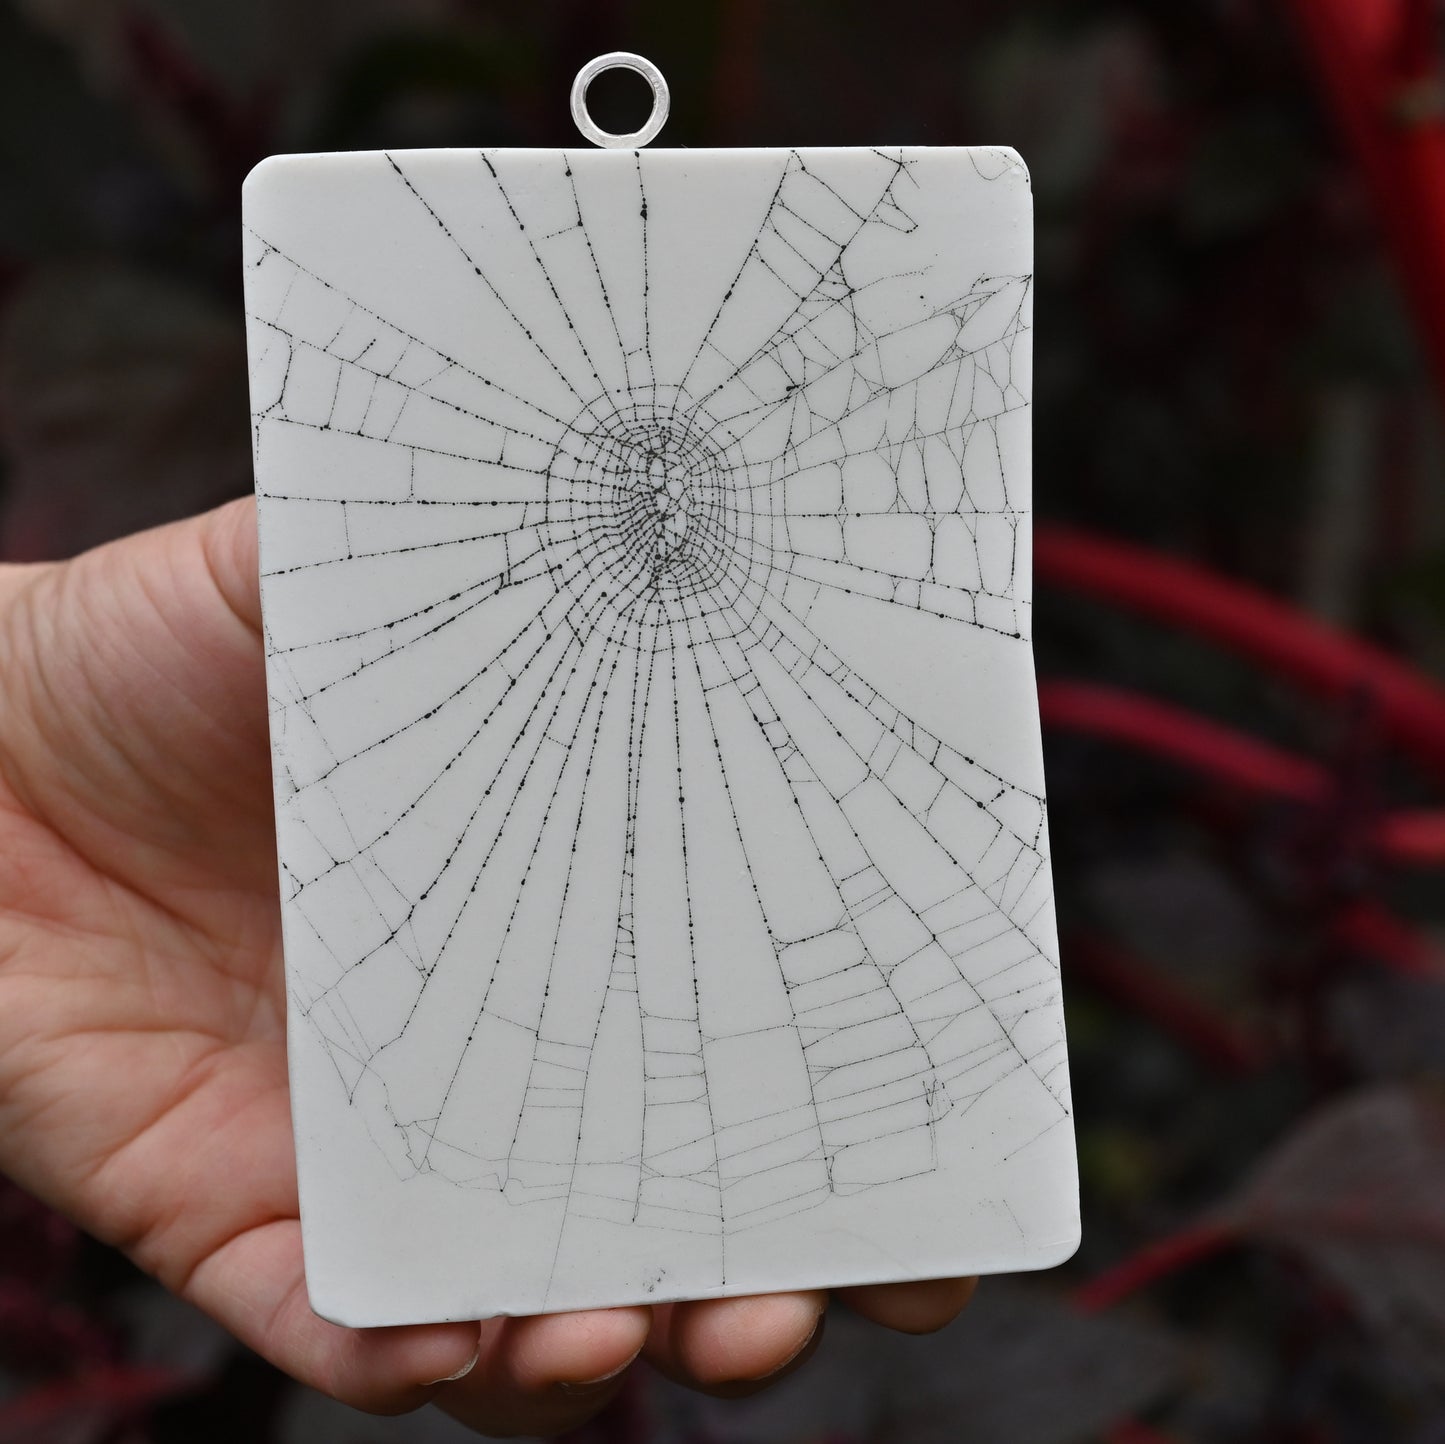 Web on Clay (137), Collected August 25, 2022